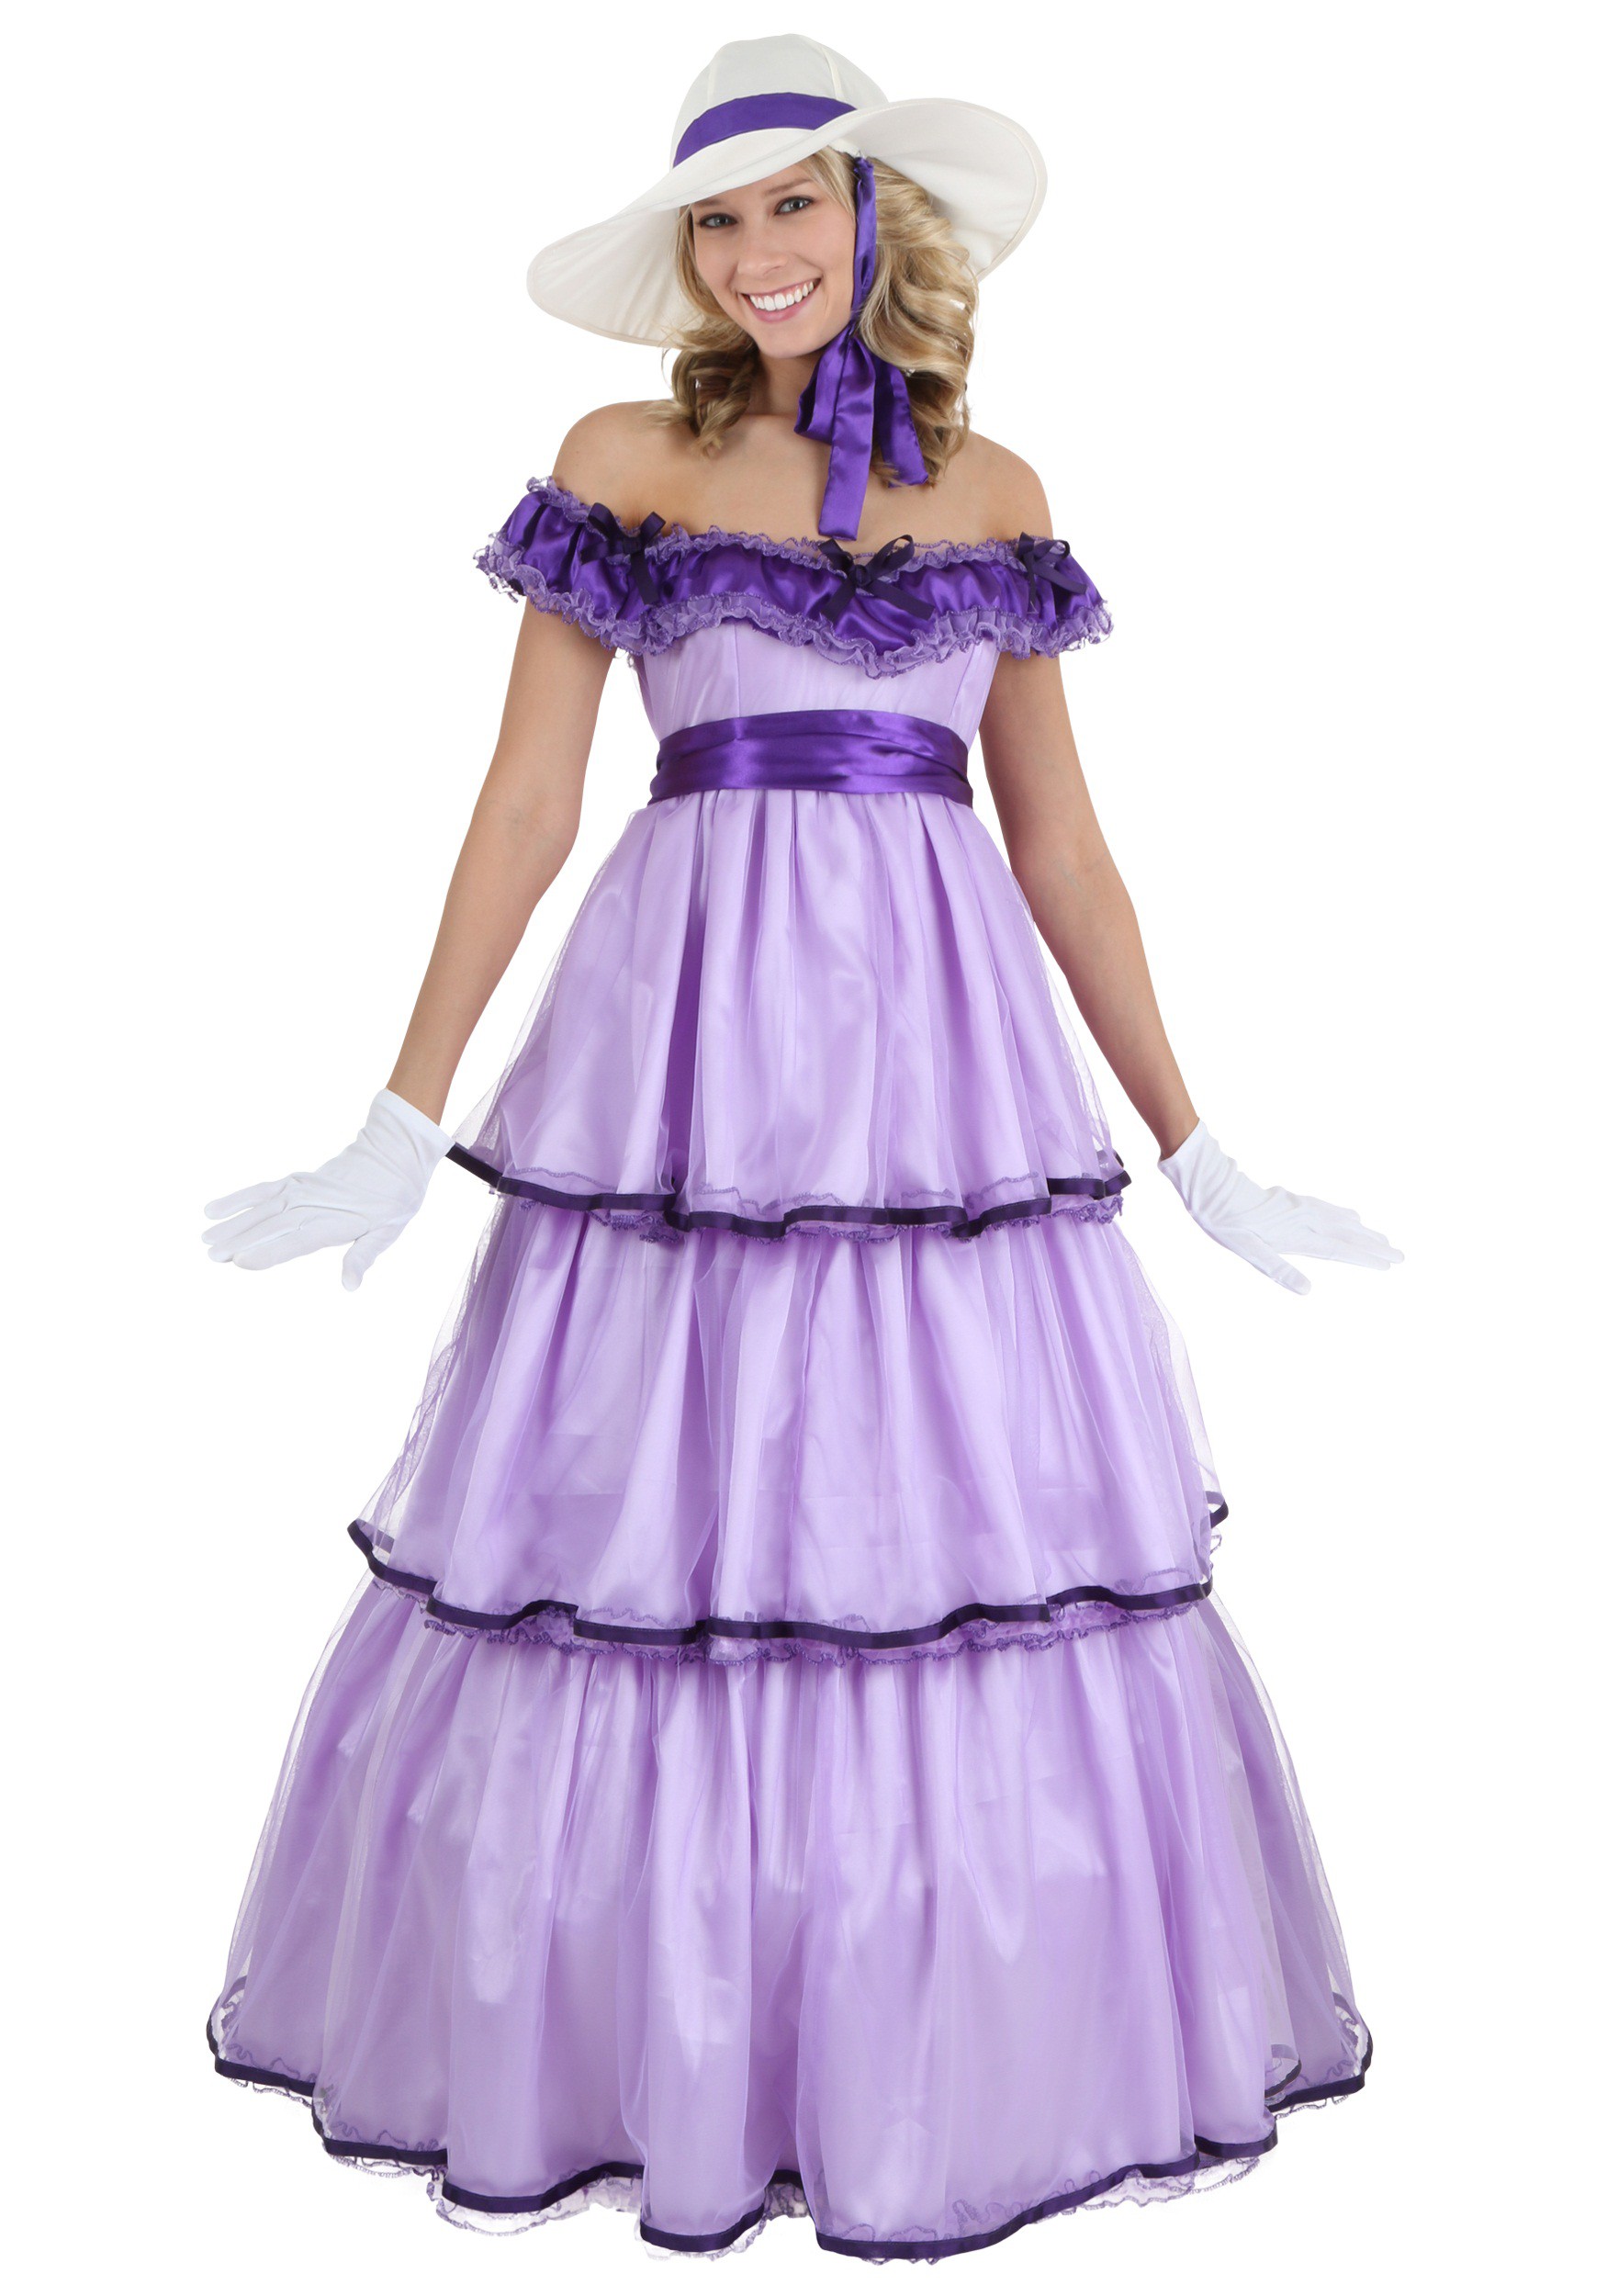 Adult Deluxe Southern Belle Fancy Dress Costume